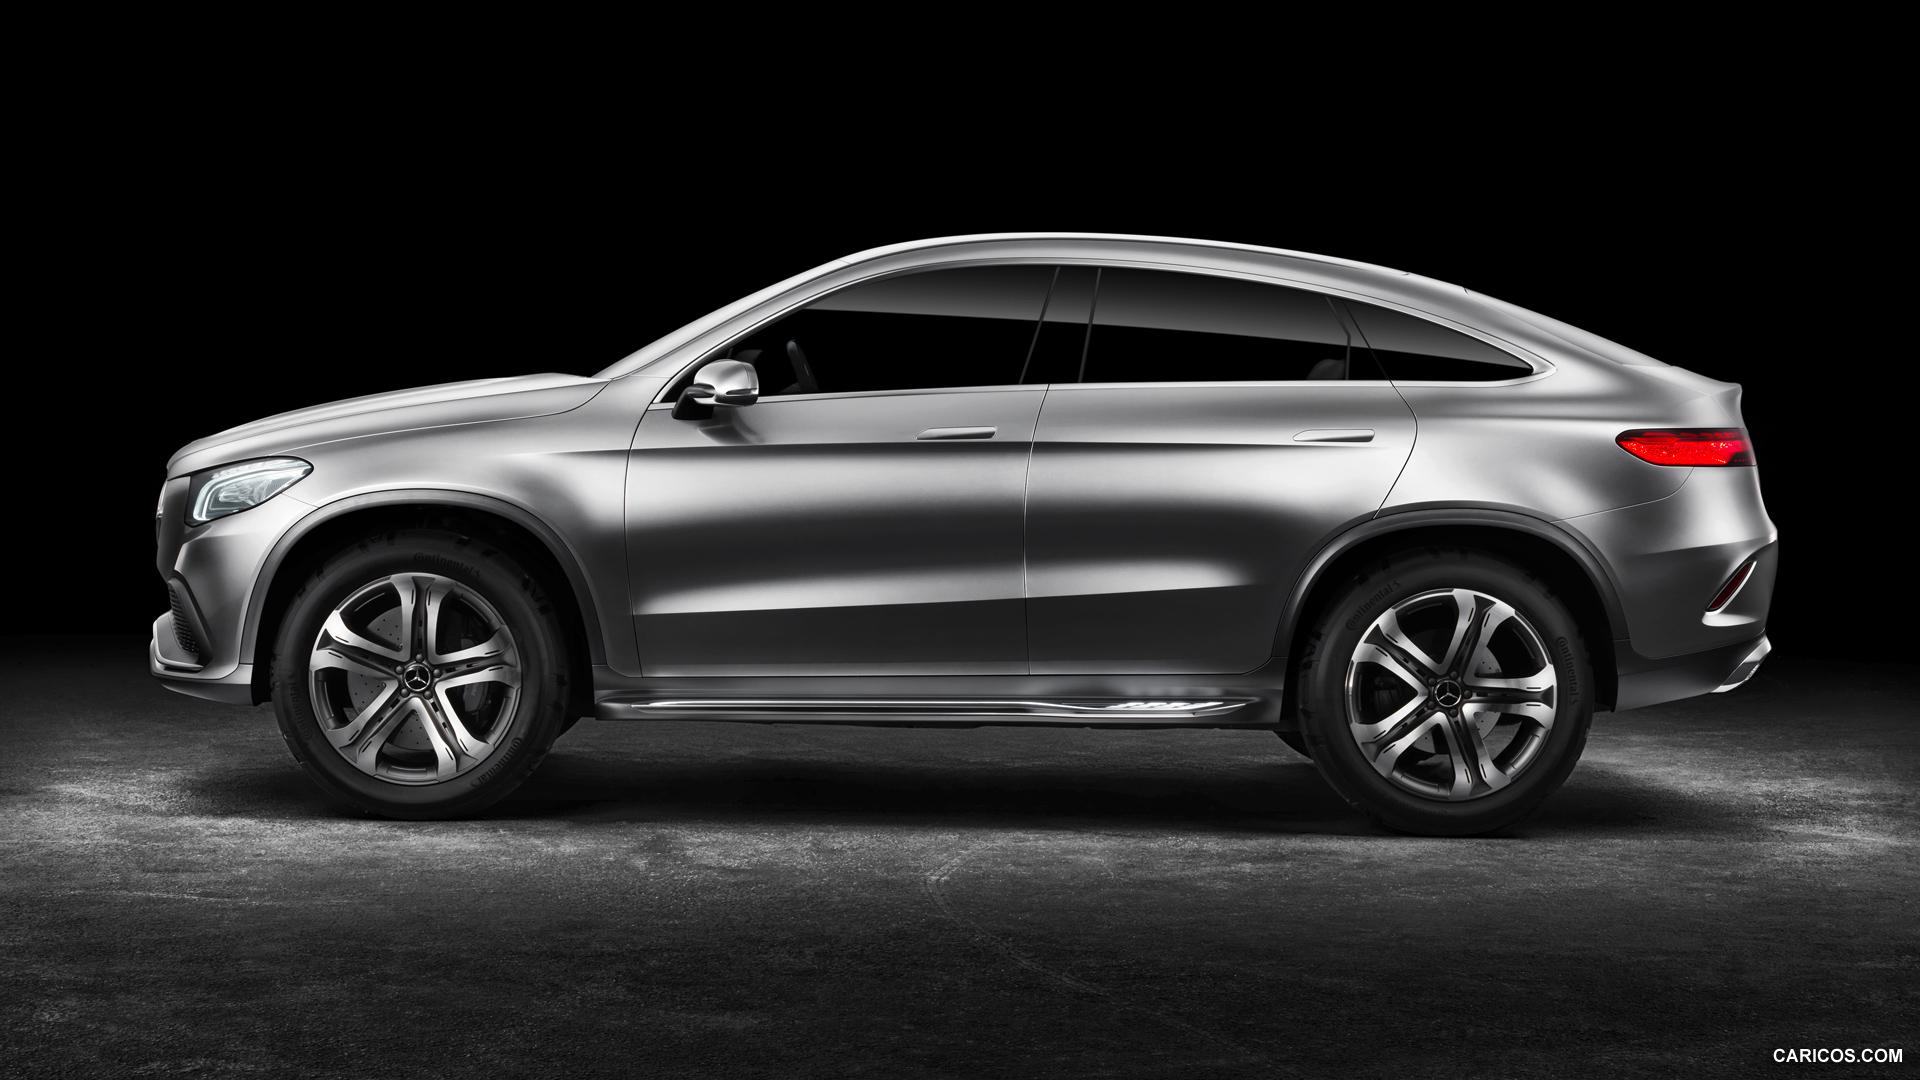 2014 Mercedes-Benz Coupe SUV Concept  - Side, #15 of 17